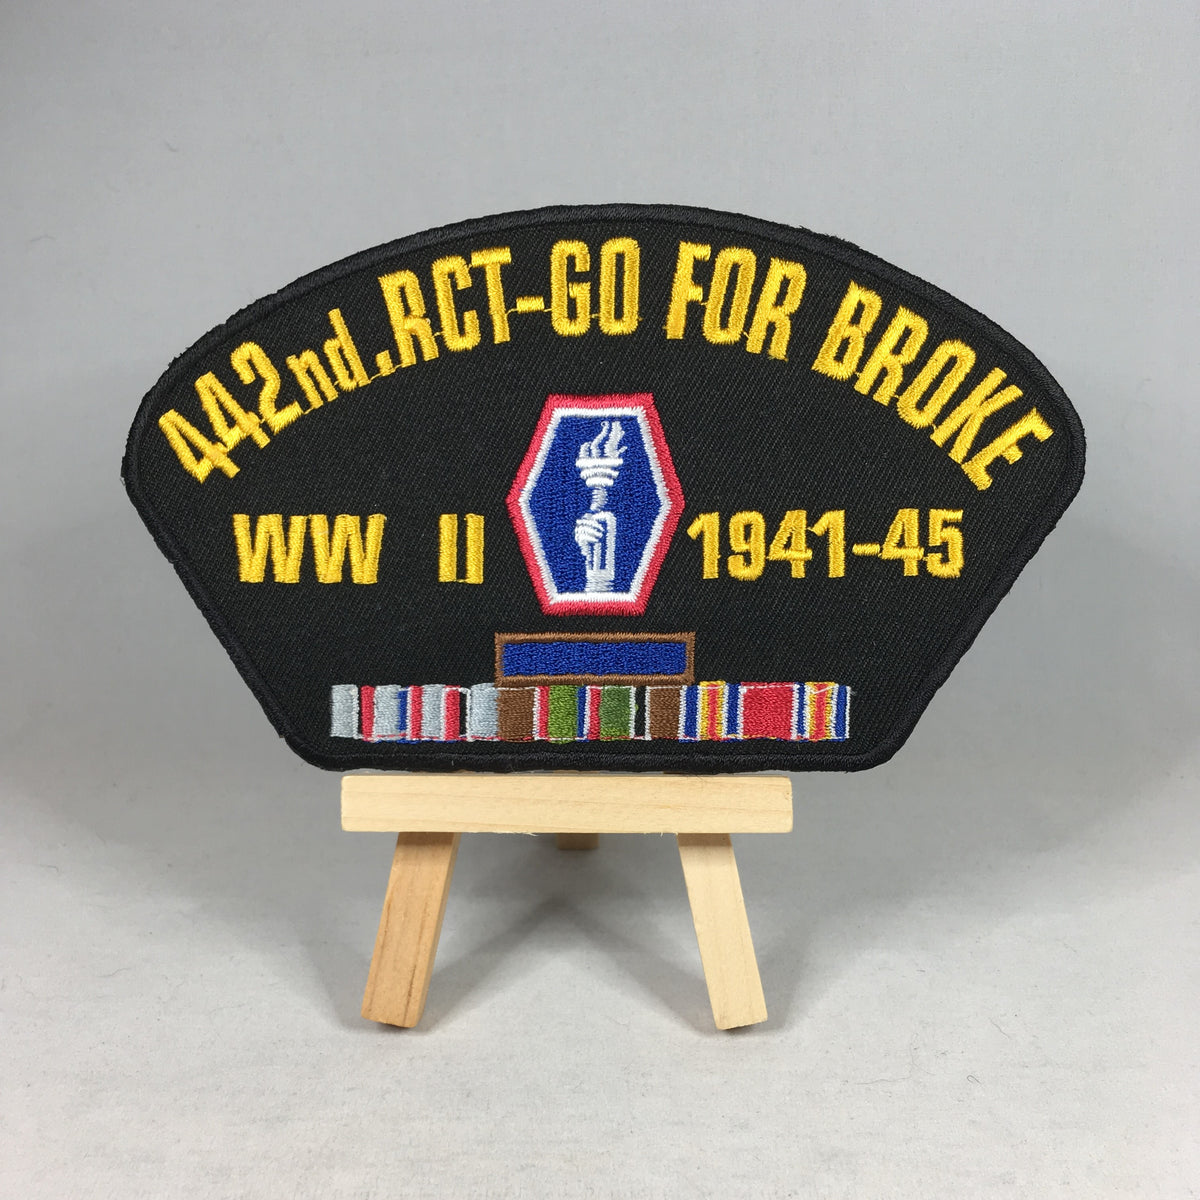 442nd RCT - Go For Broke WWII Patch